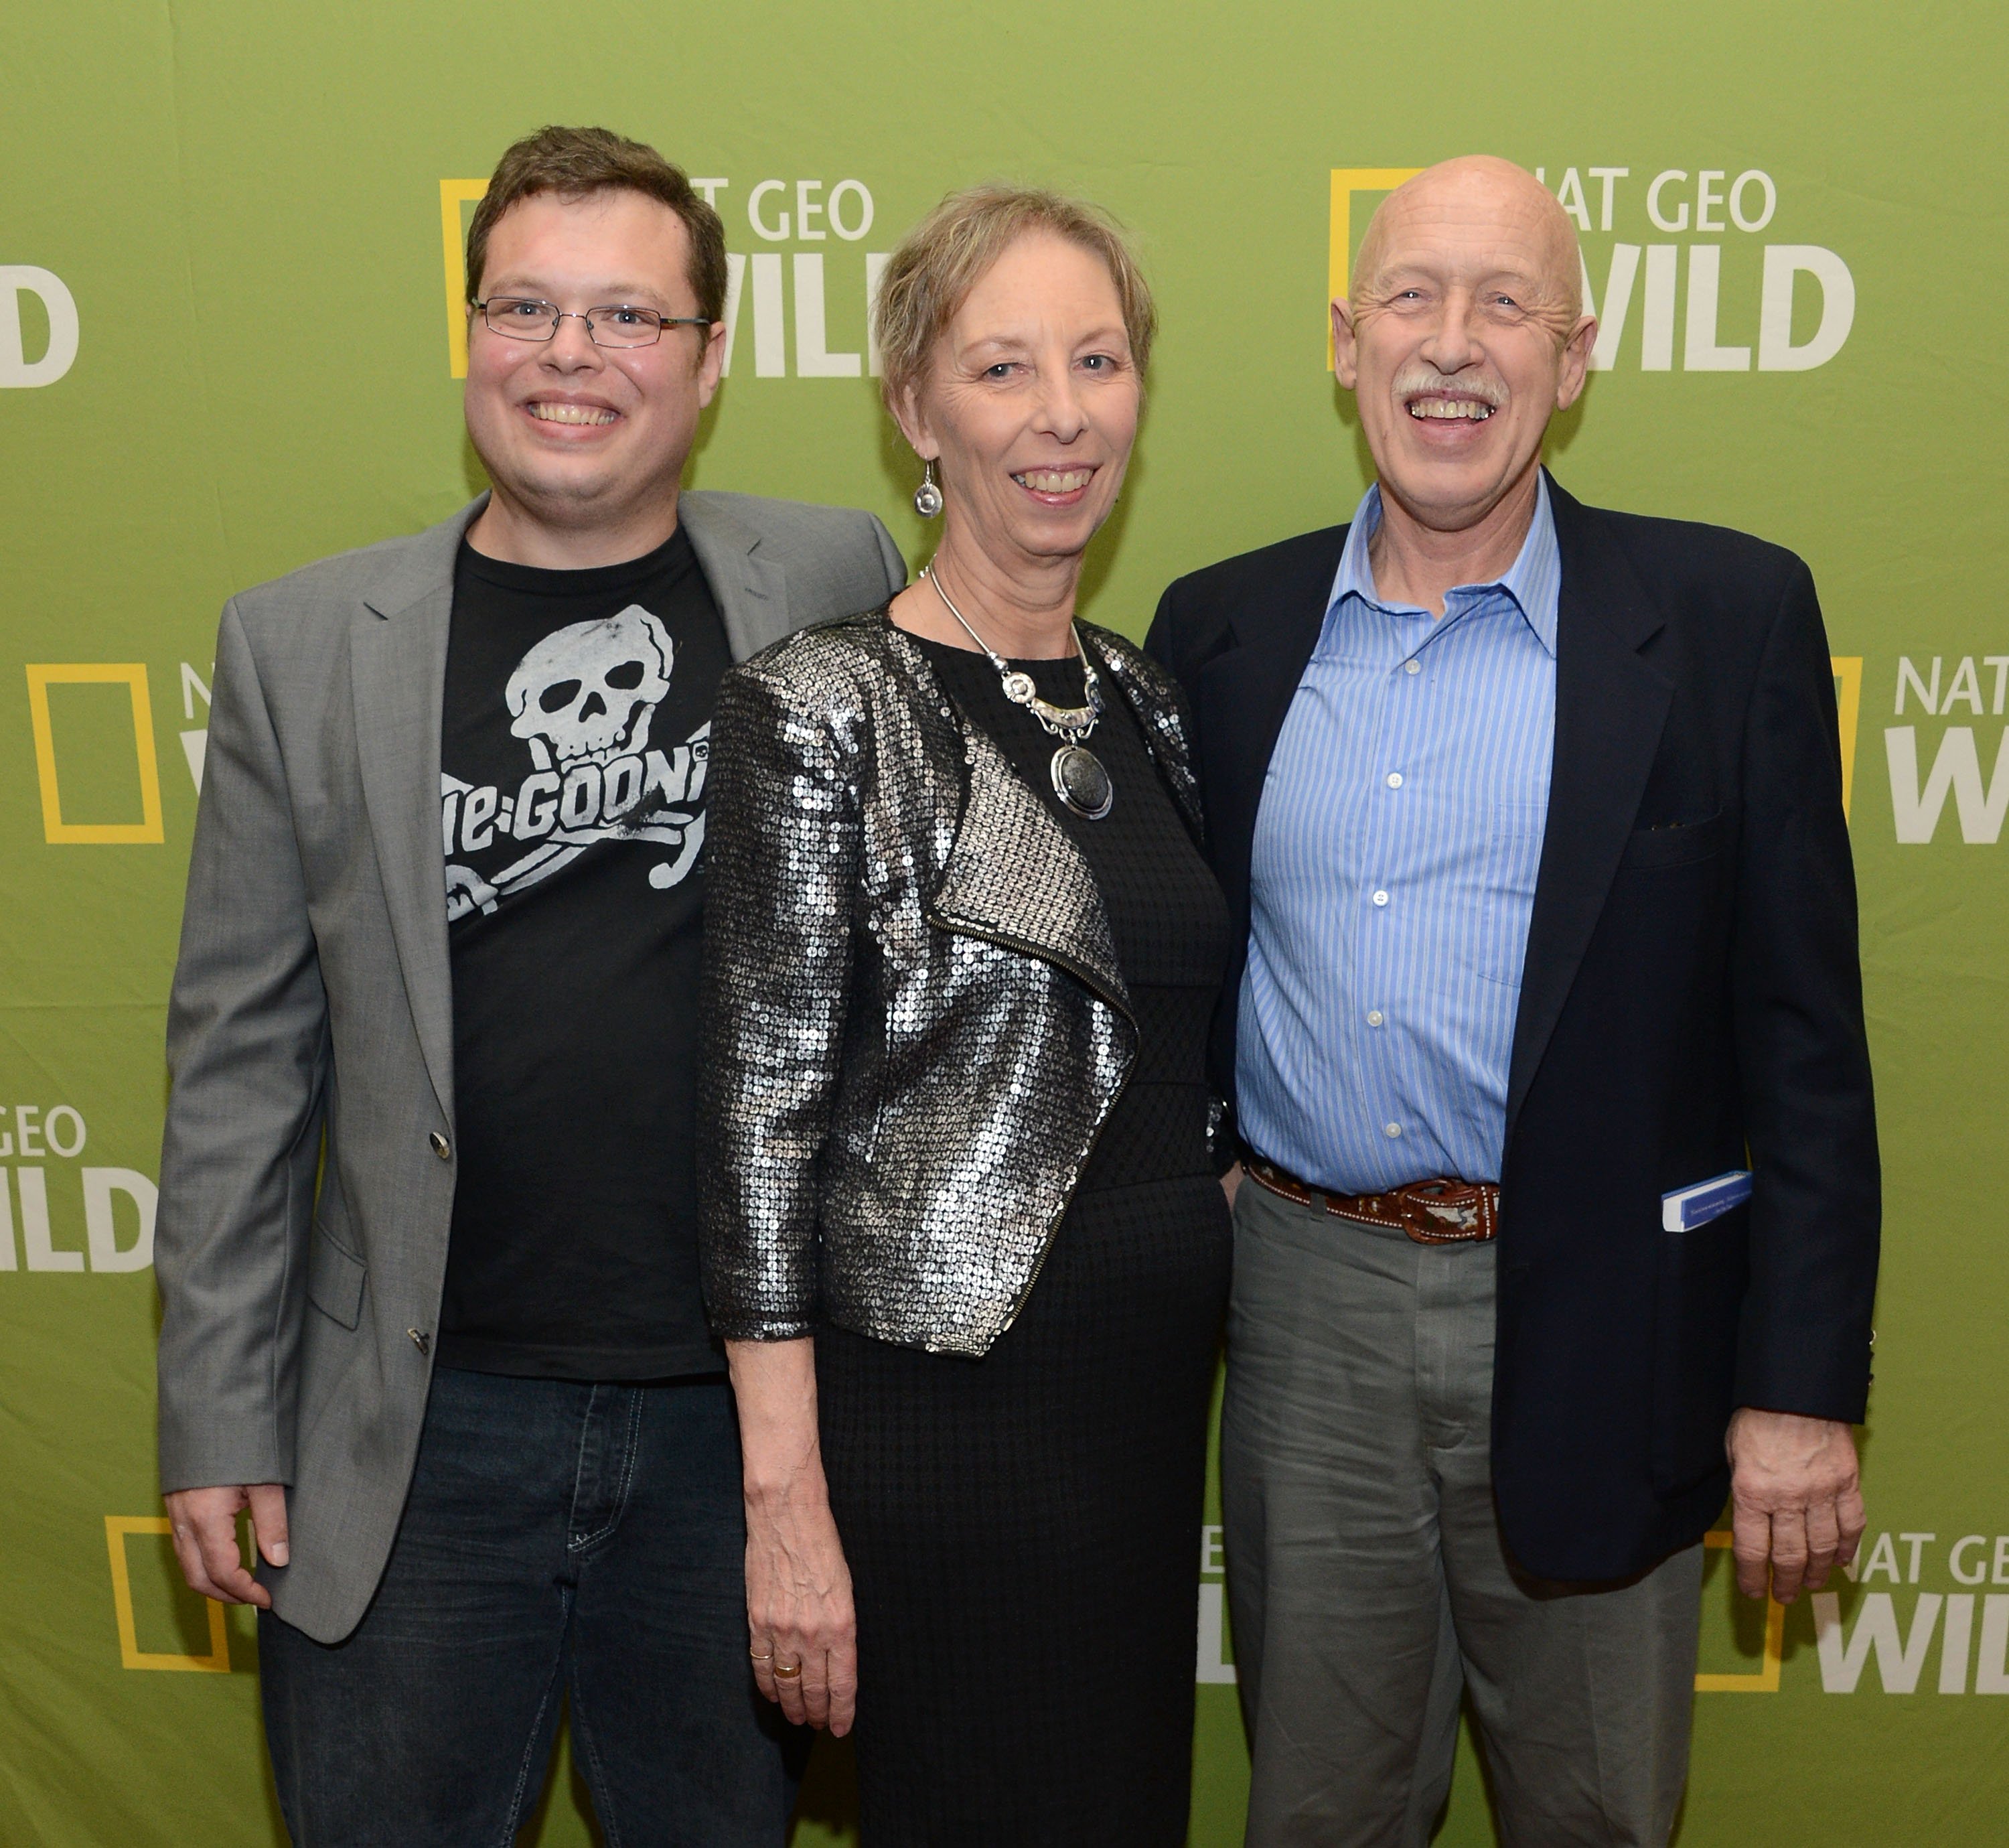 Charles Pol, Diane Pol, and Dr. Jan Pol of 'The Incredible Dr. Pol'